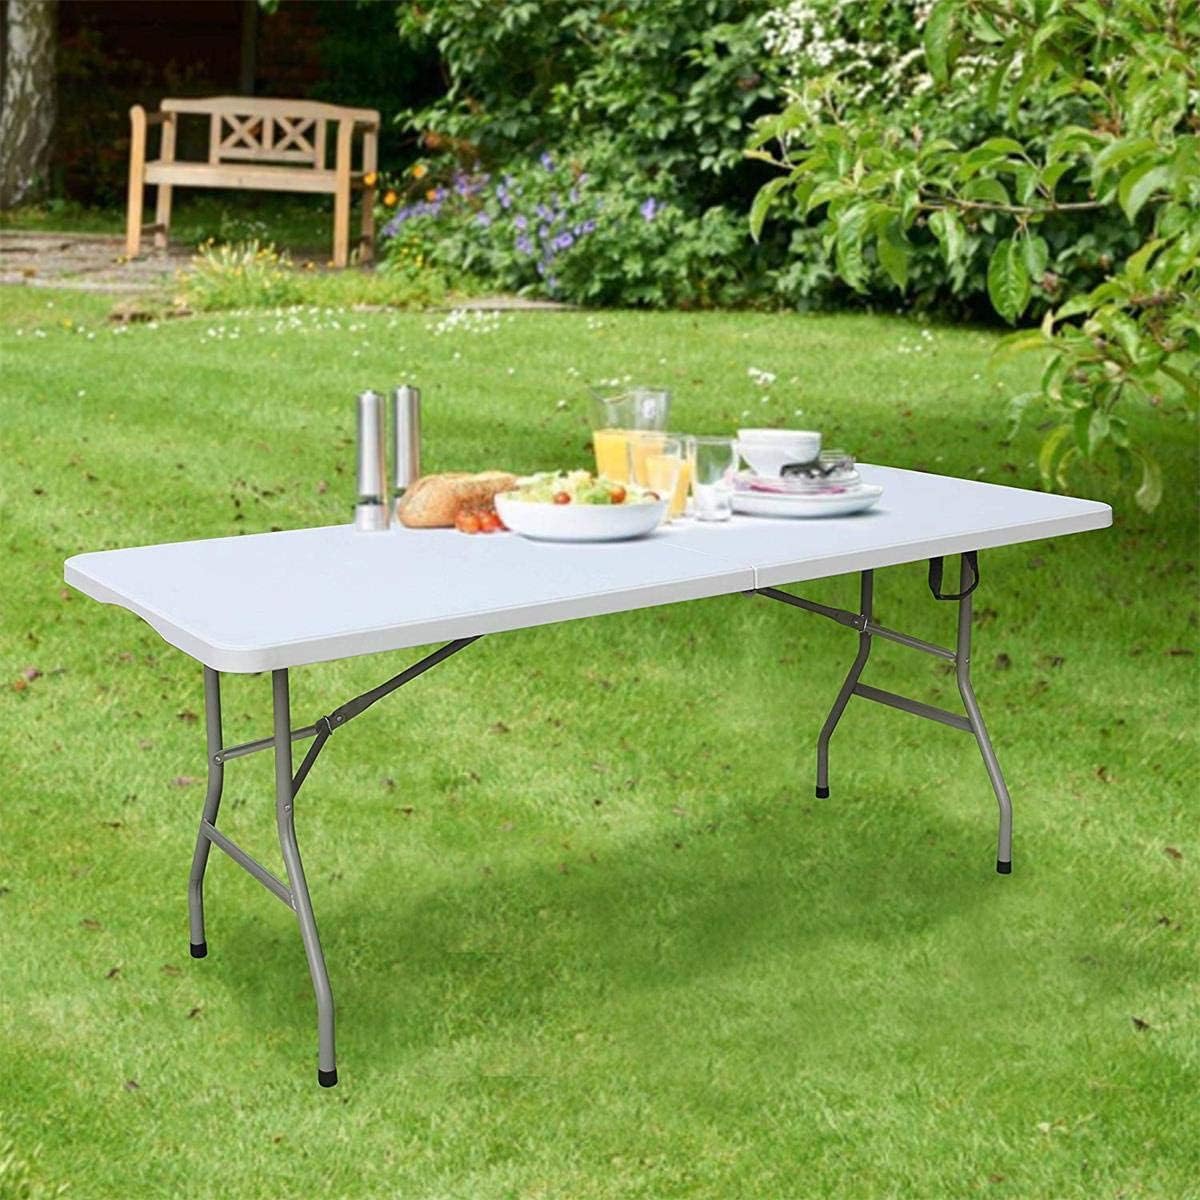 Portable Classic Plastic Folding Table for Picnic Dining table,Camp Event,Plain Whit - Al Ghani Stores